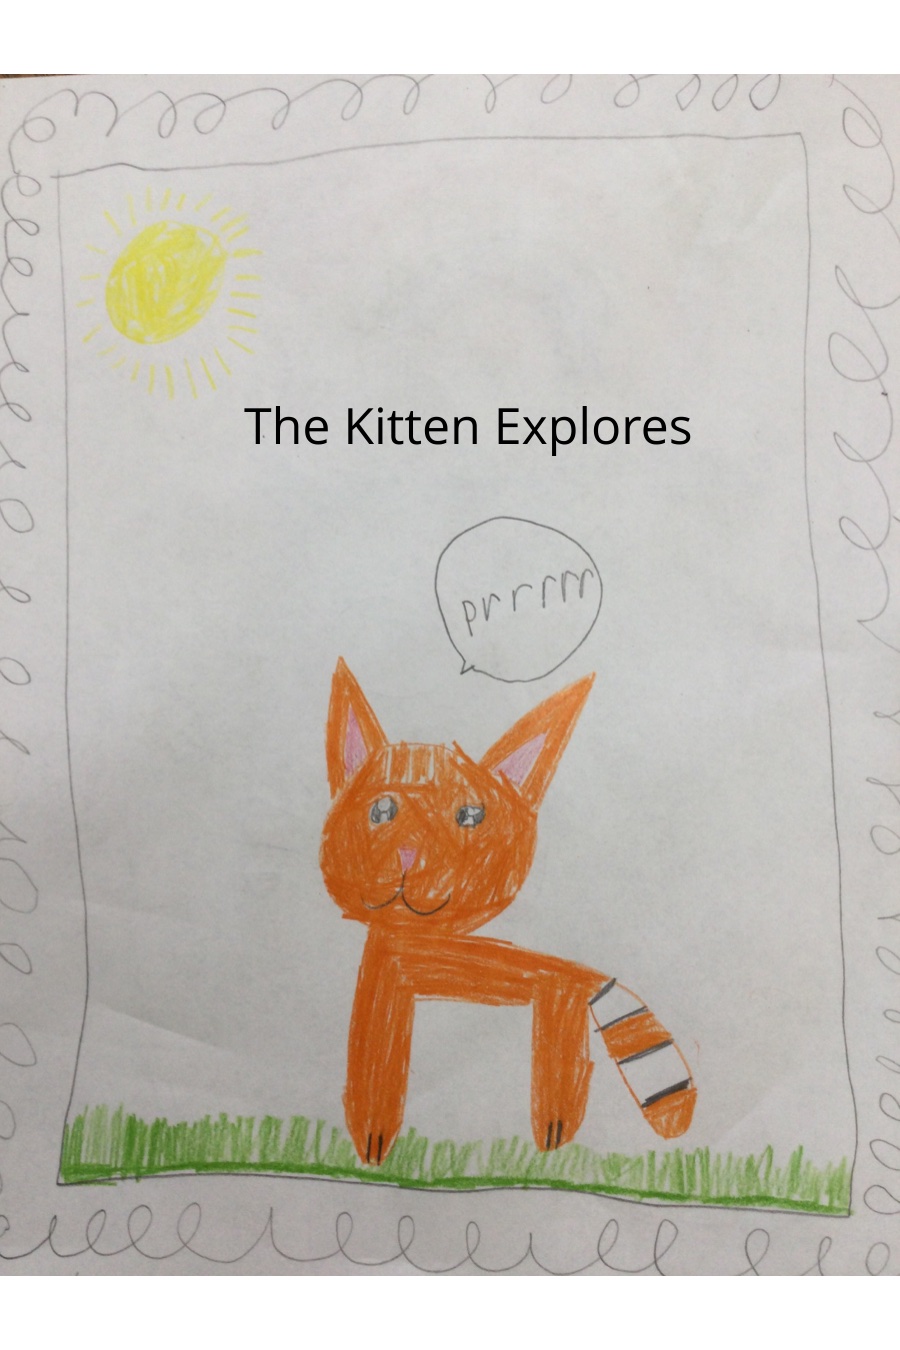 The Kitten Explores by Grace S